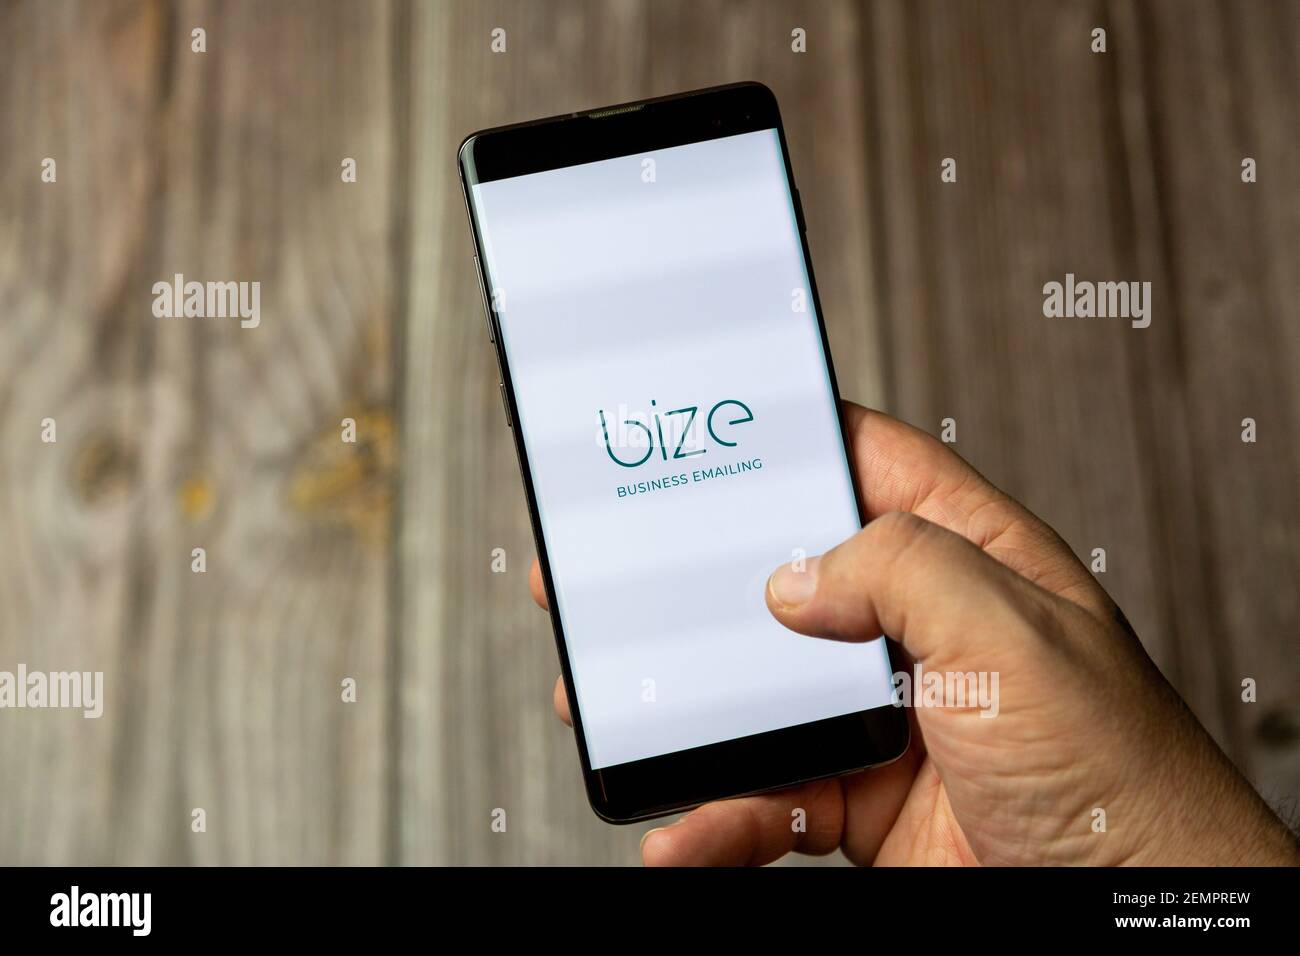 A mobile phone or cell phone being held by a hand with the Bize business emailing app open on screen Stock Photo